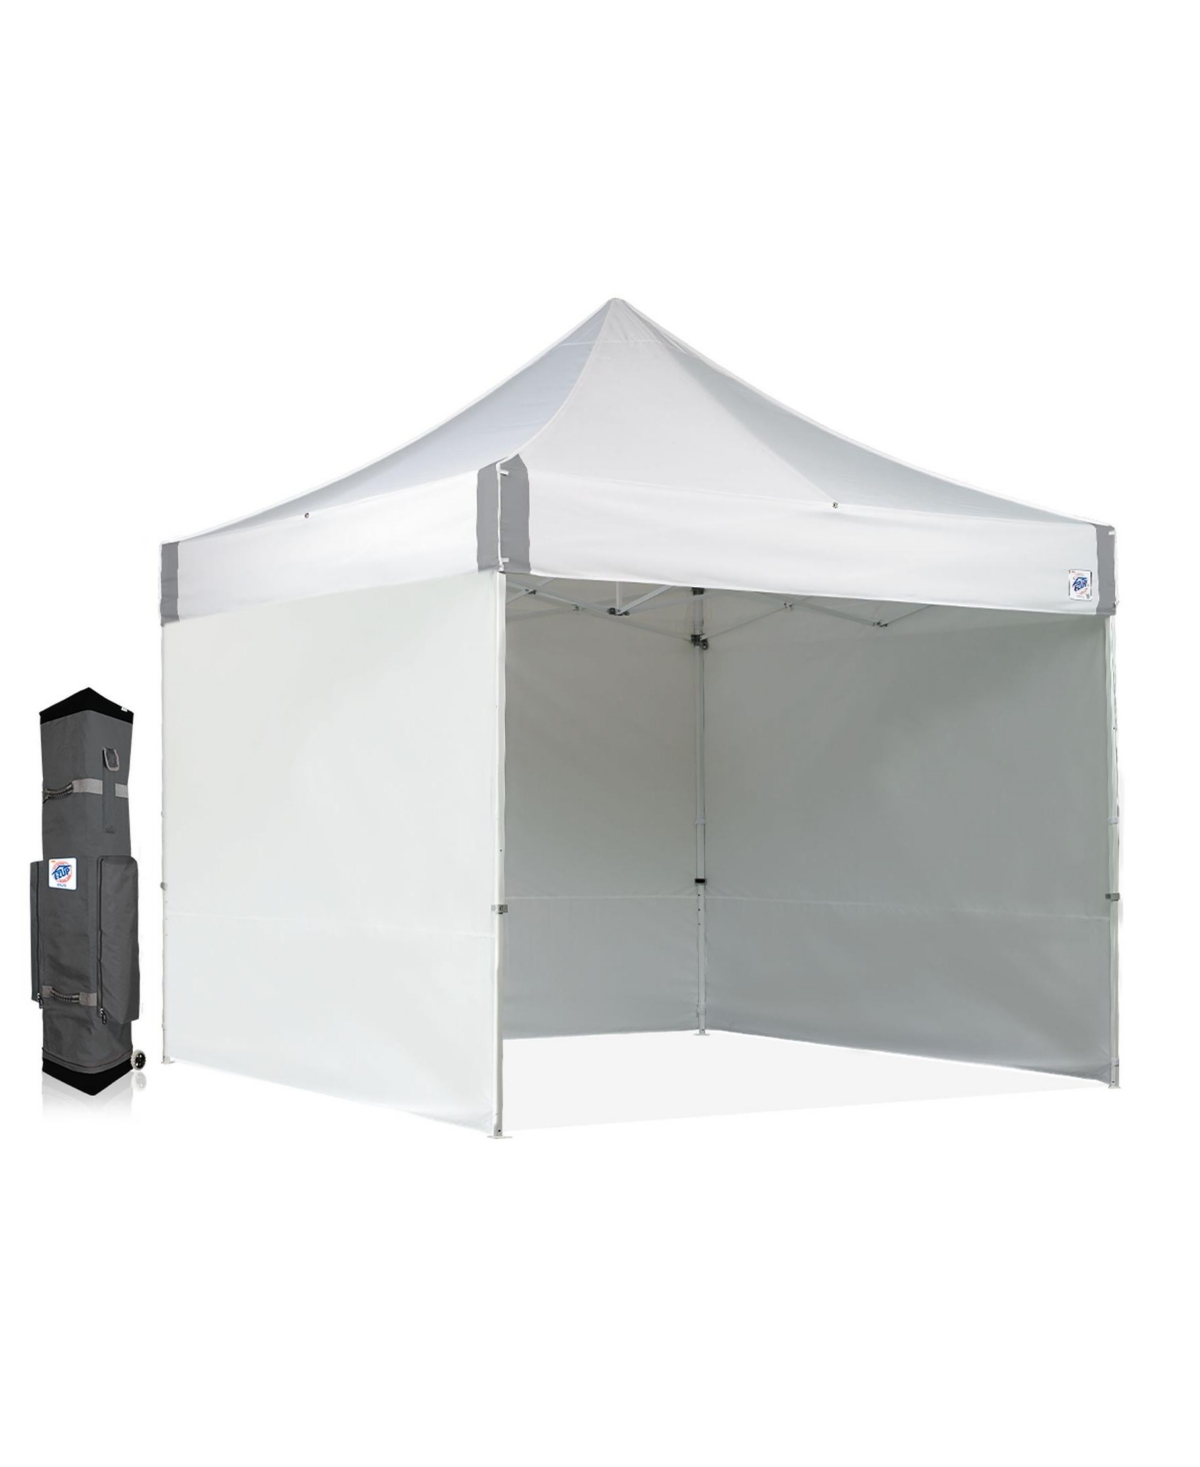 EZ UP ES100S INSTANT COMMERCIAL CANOPY 10FT X 10FT W/SIDEWALLS AND WIDETRAX ROLLER BAG WHITE